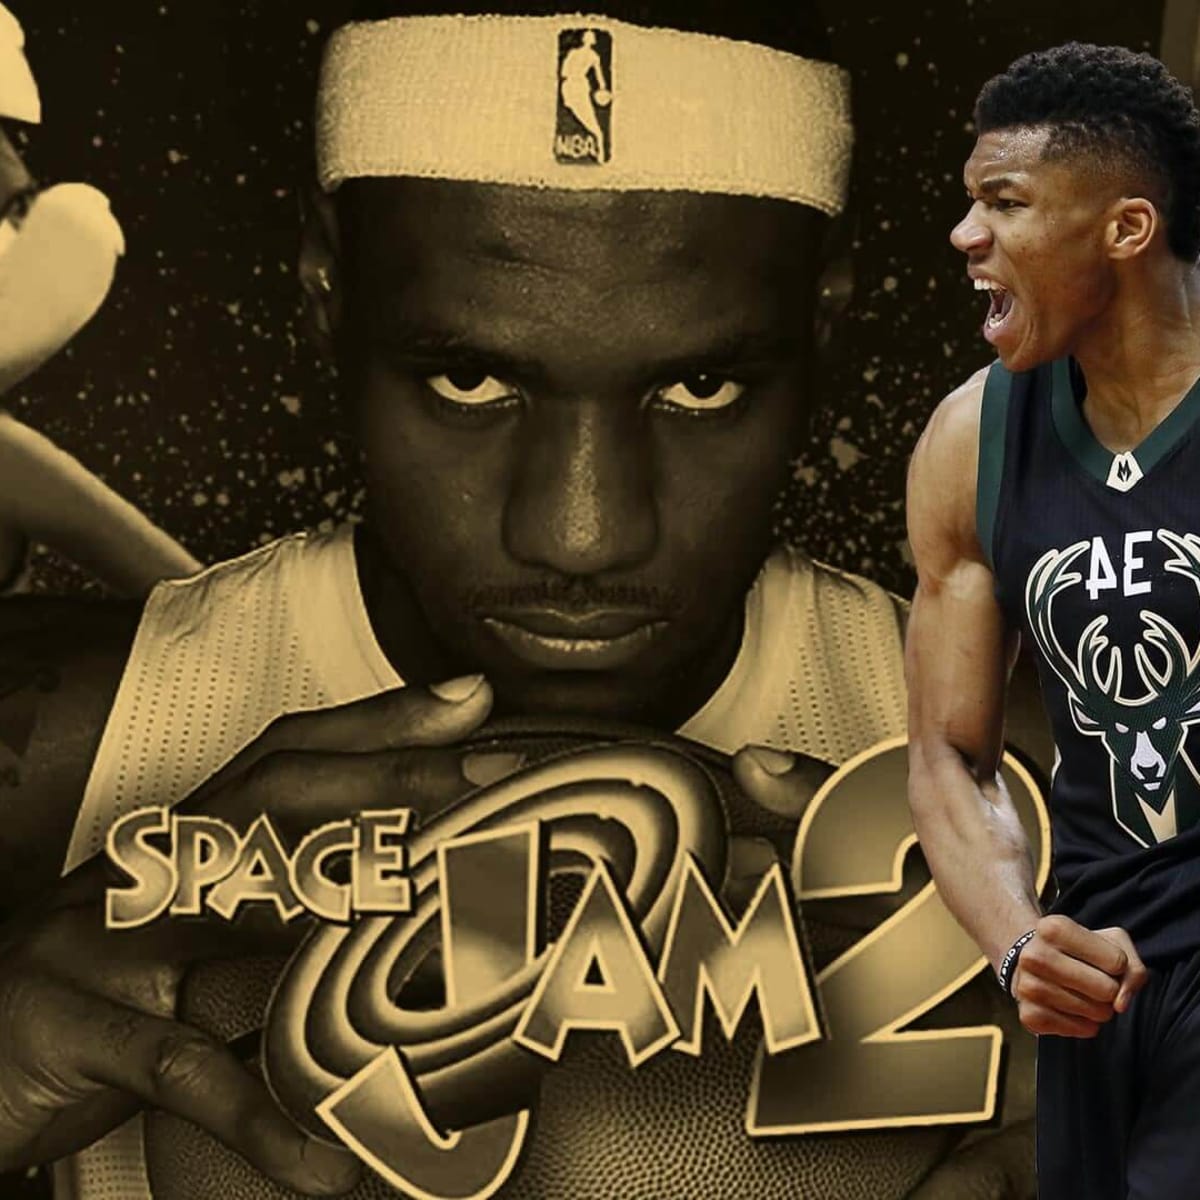 Lakers News: The jerseys for 'Space Jam 2' have been revealed